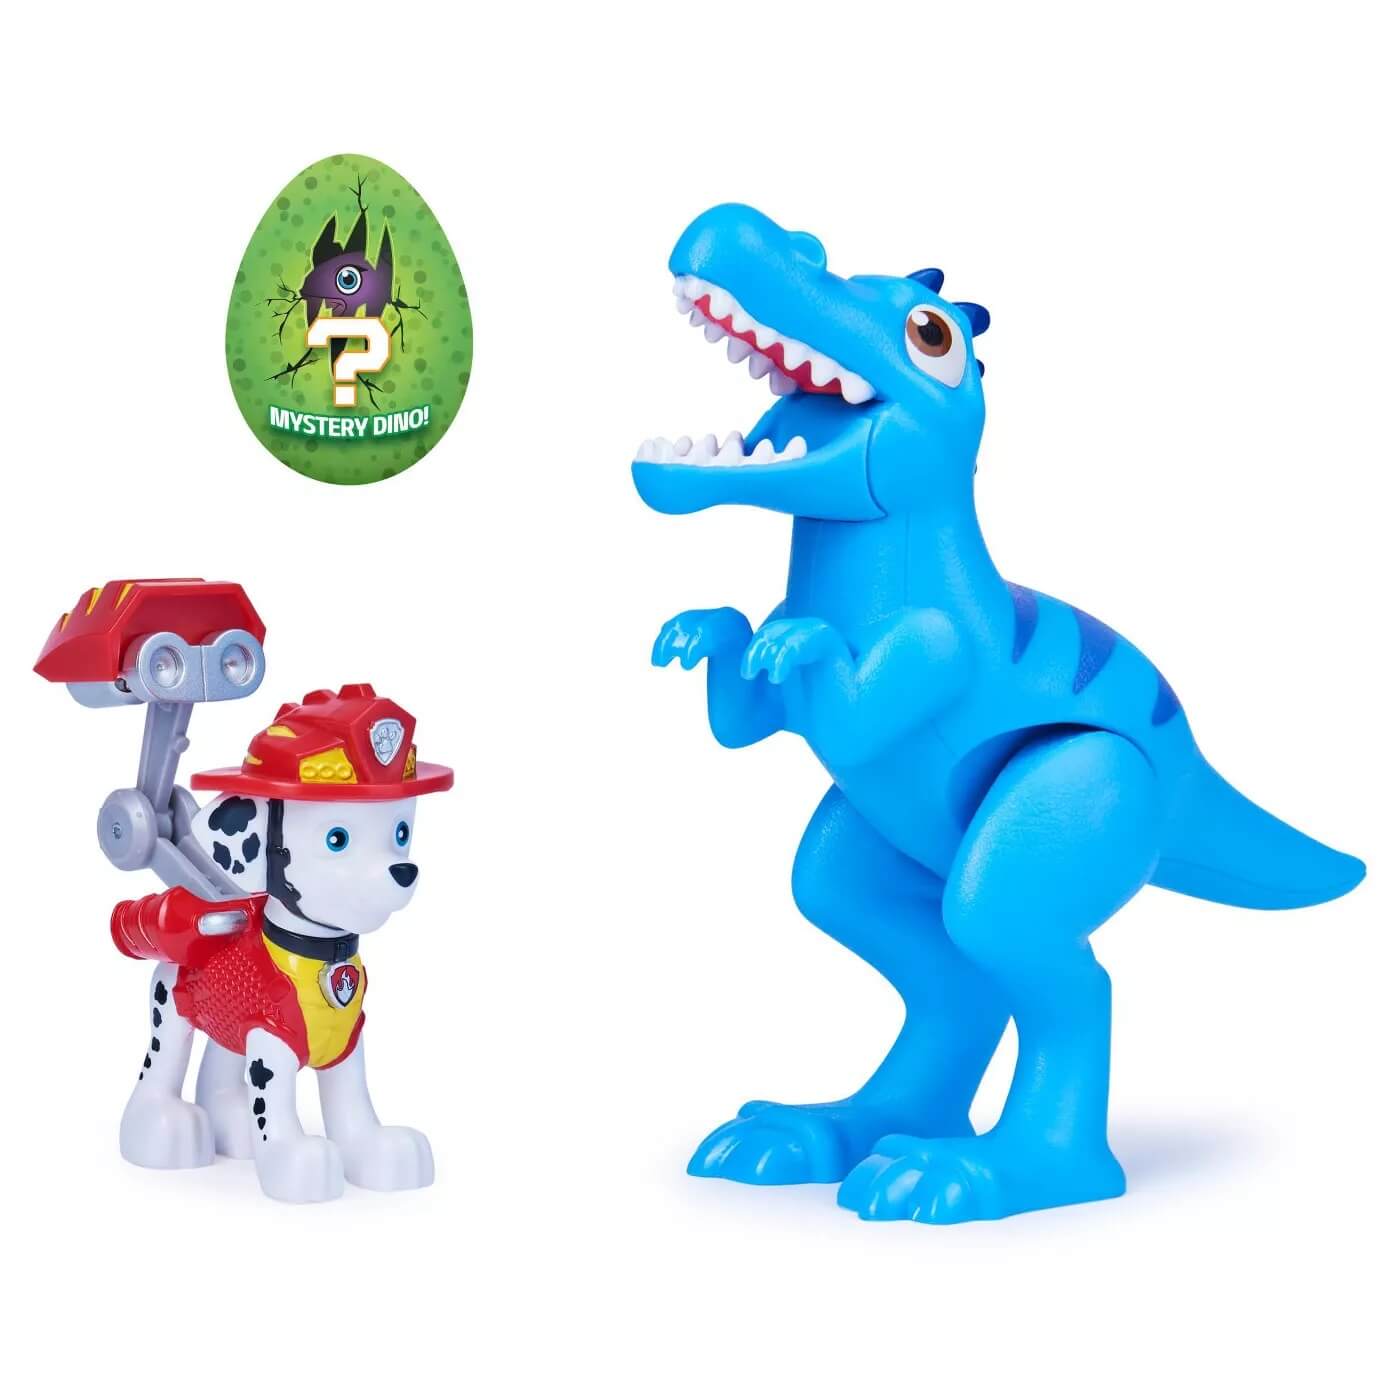 Spin Master PAW Patrol Dino Rescue Marshall and Velociraptor Action Figure Set